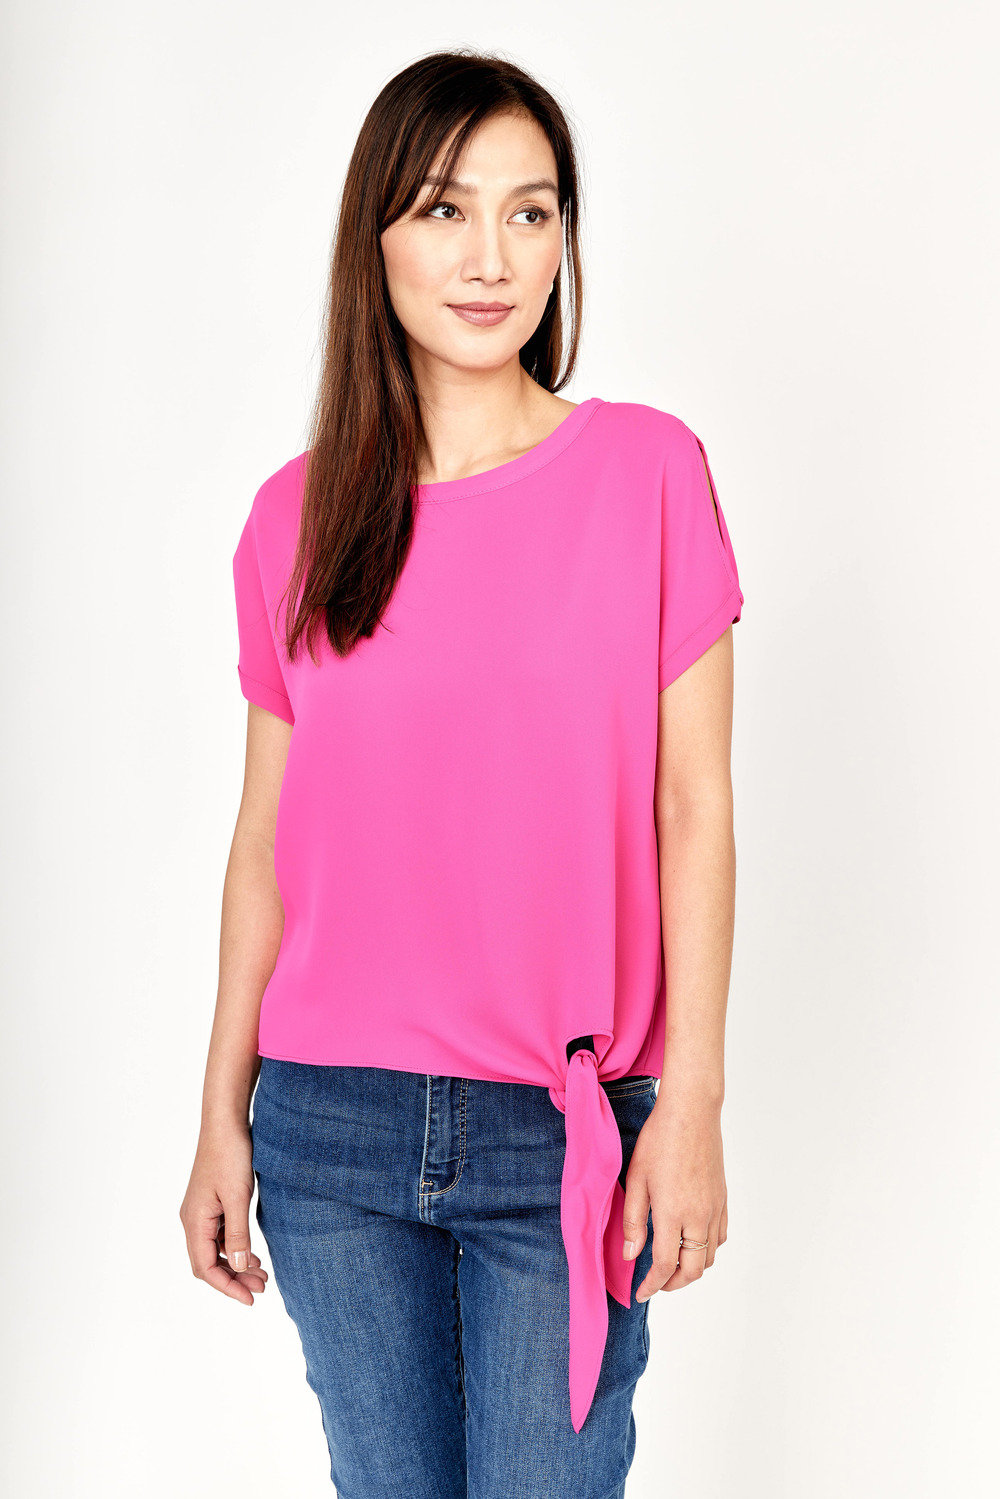 Short Sleeve Tie Front Top Style 181224. Hot Pink